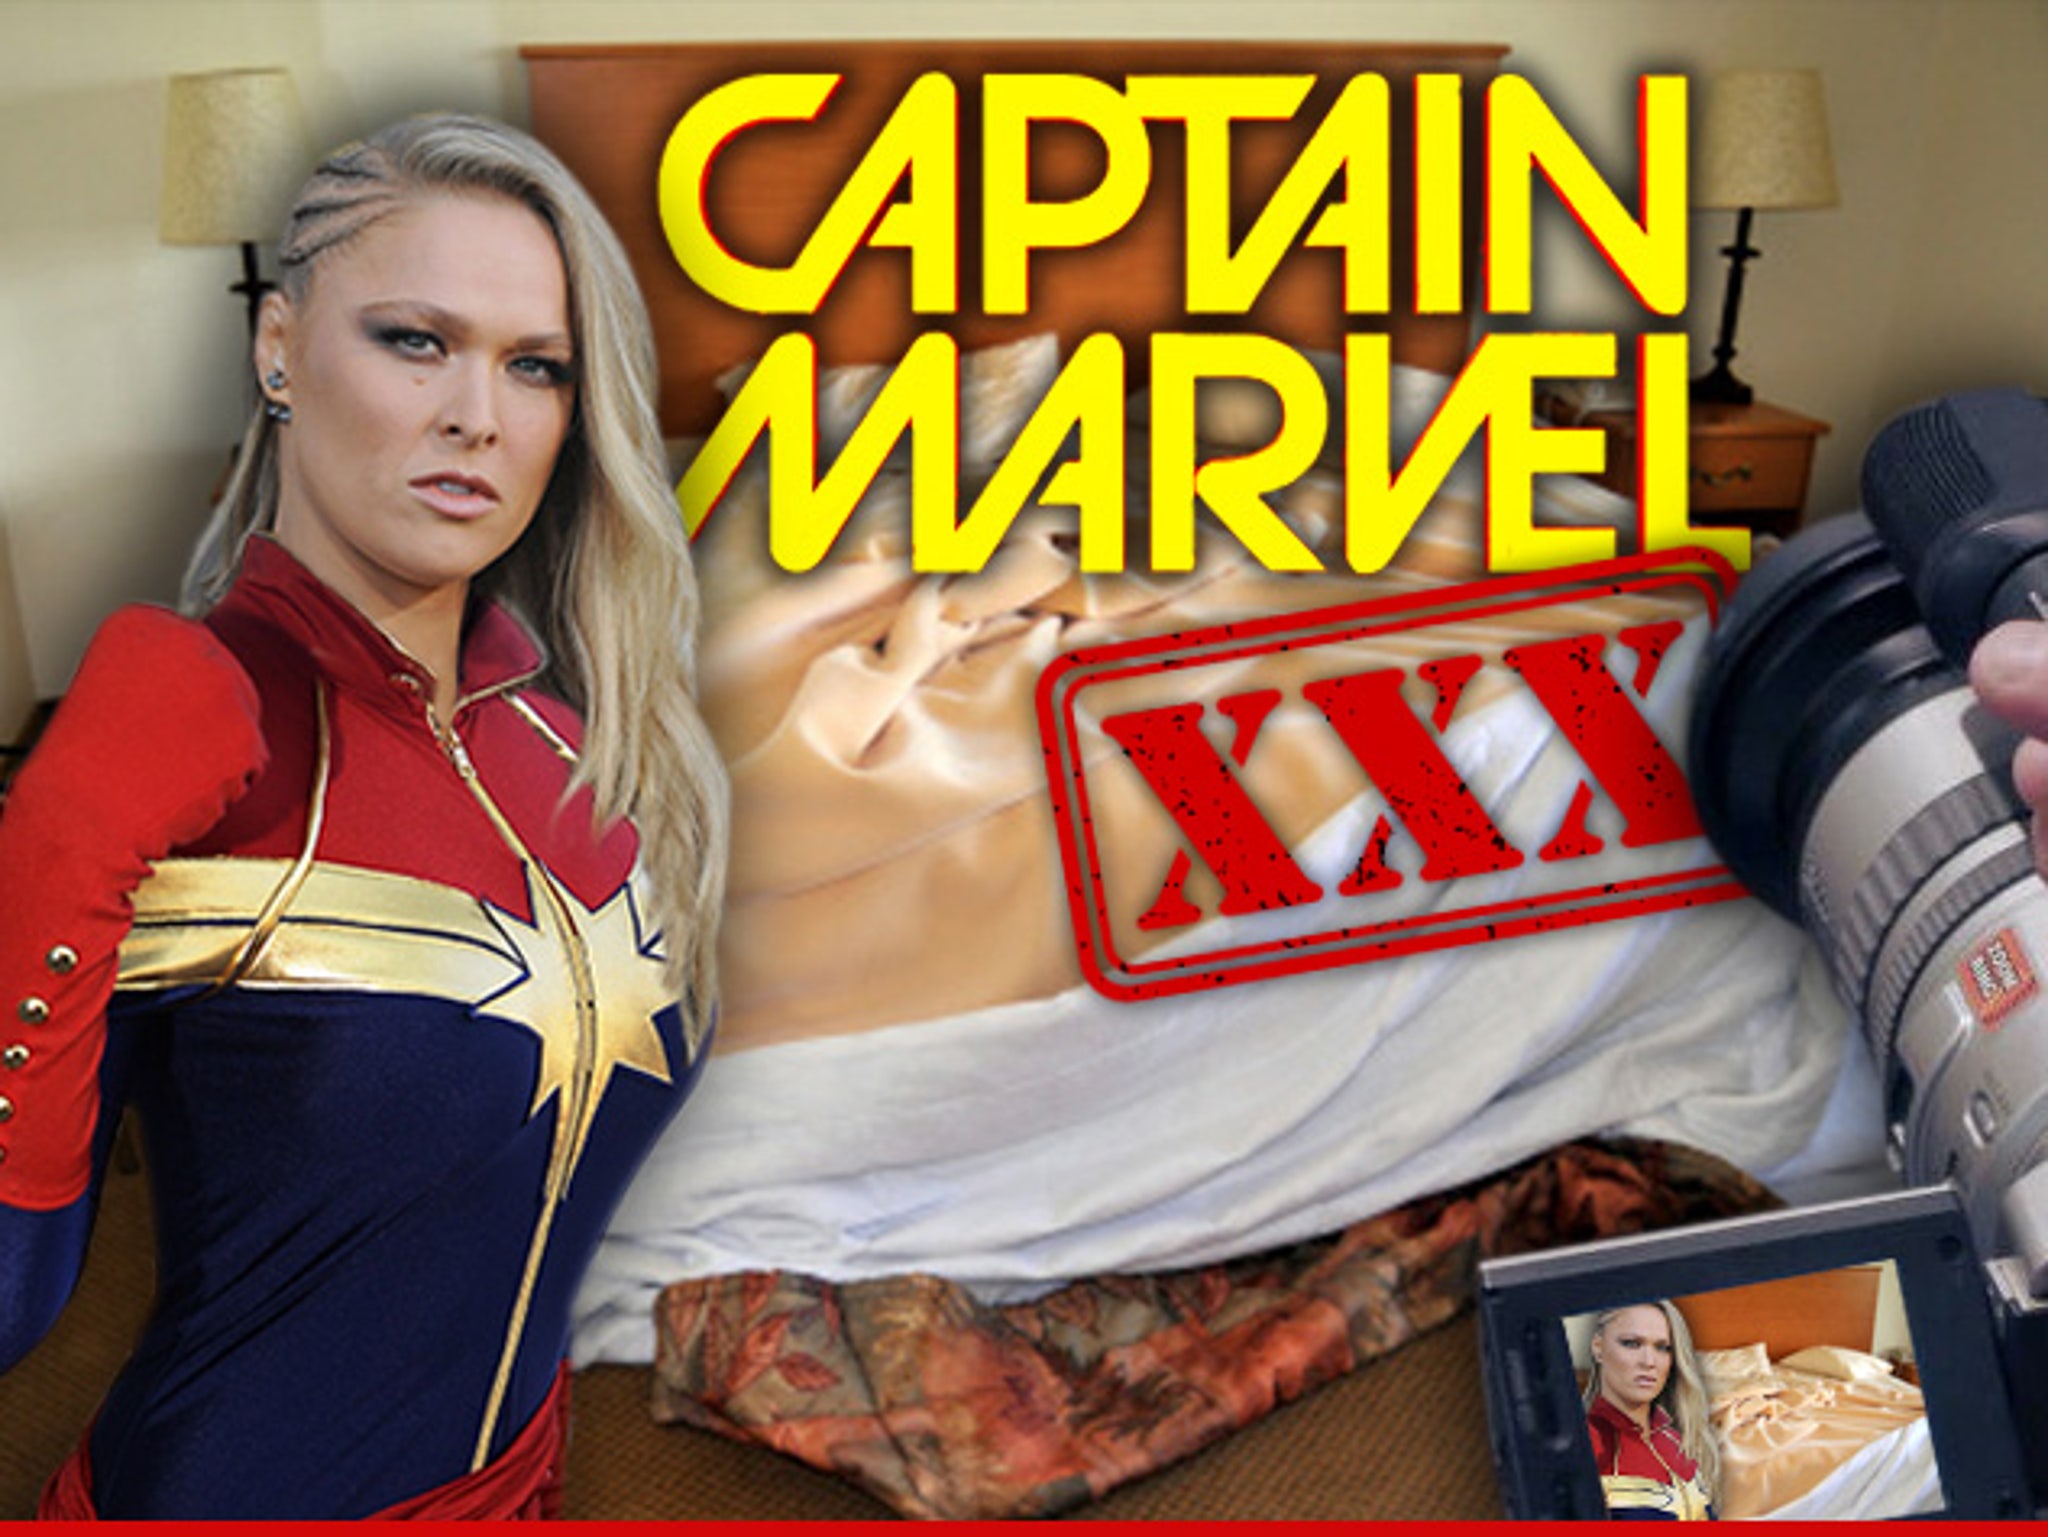 Captin Marvel Porn Video Watch - Ronda Rousey -- Gets First Shot to Be a Superhero ... But It's in ...